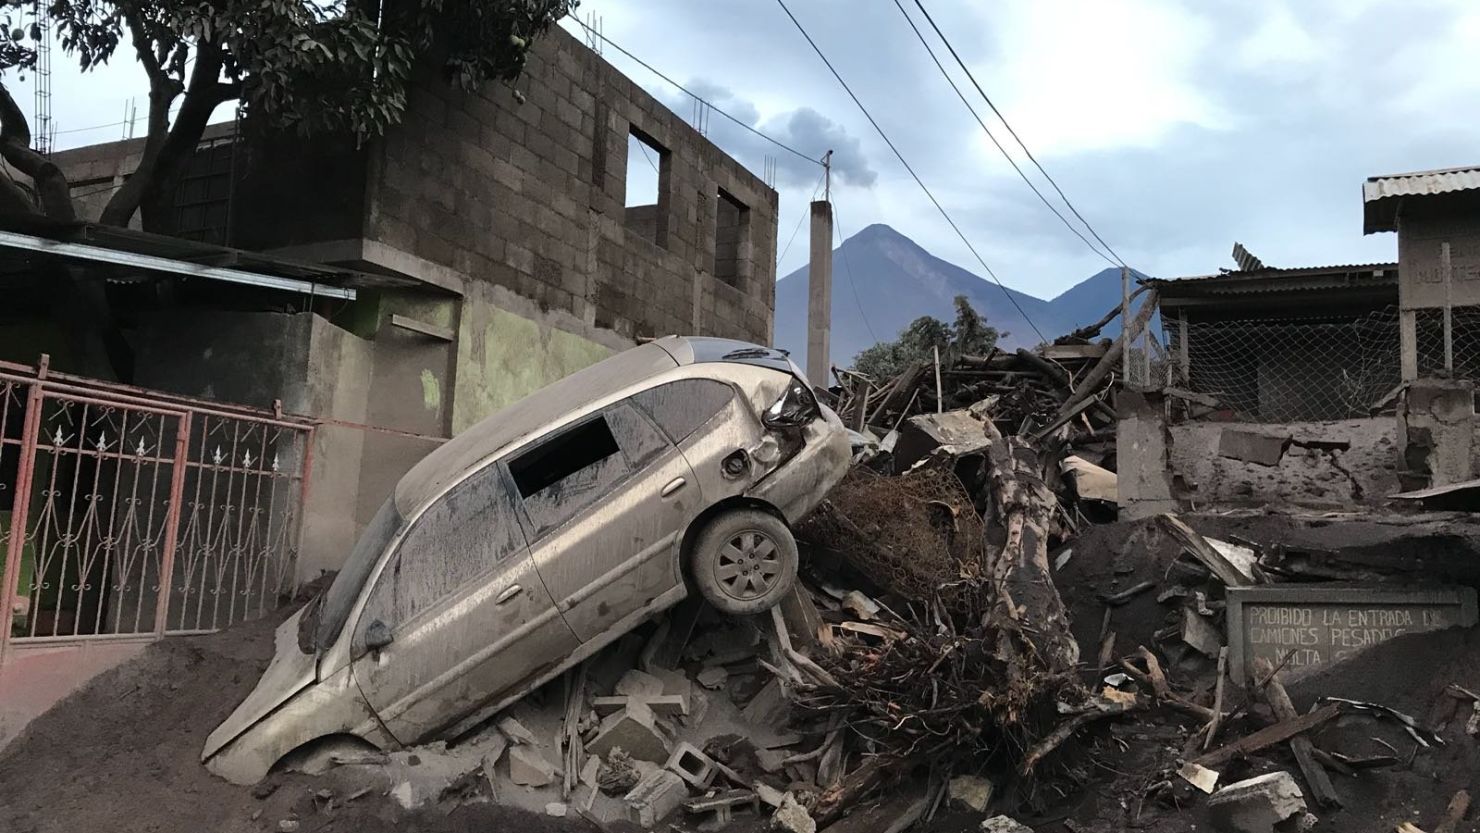 An abandoned car rests atop debris Wednesday in El Rodeo, Guatemala, after the volcano's eruption.